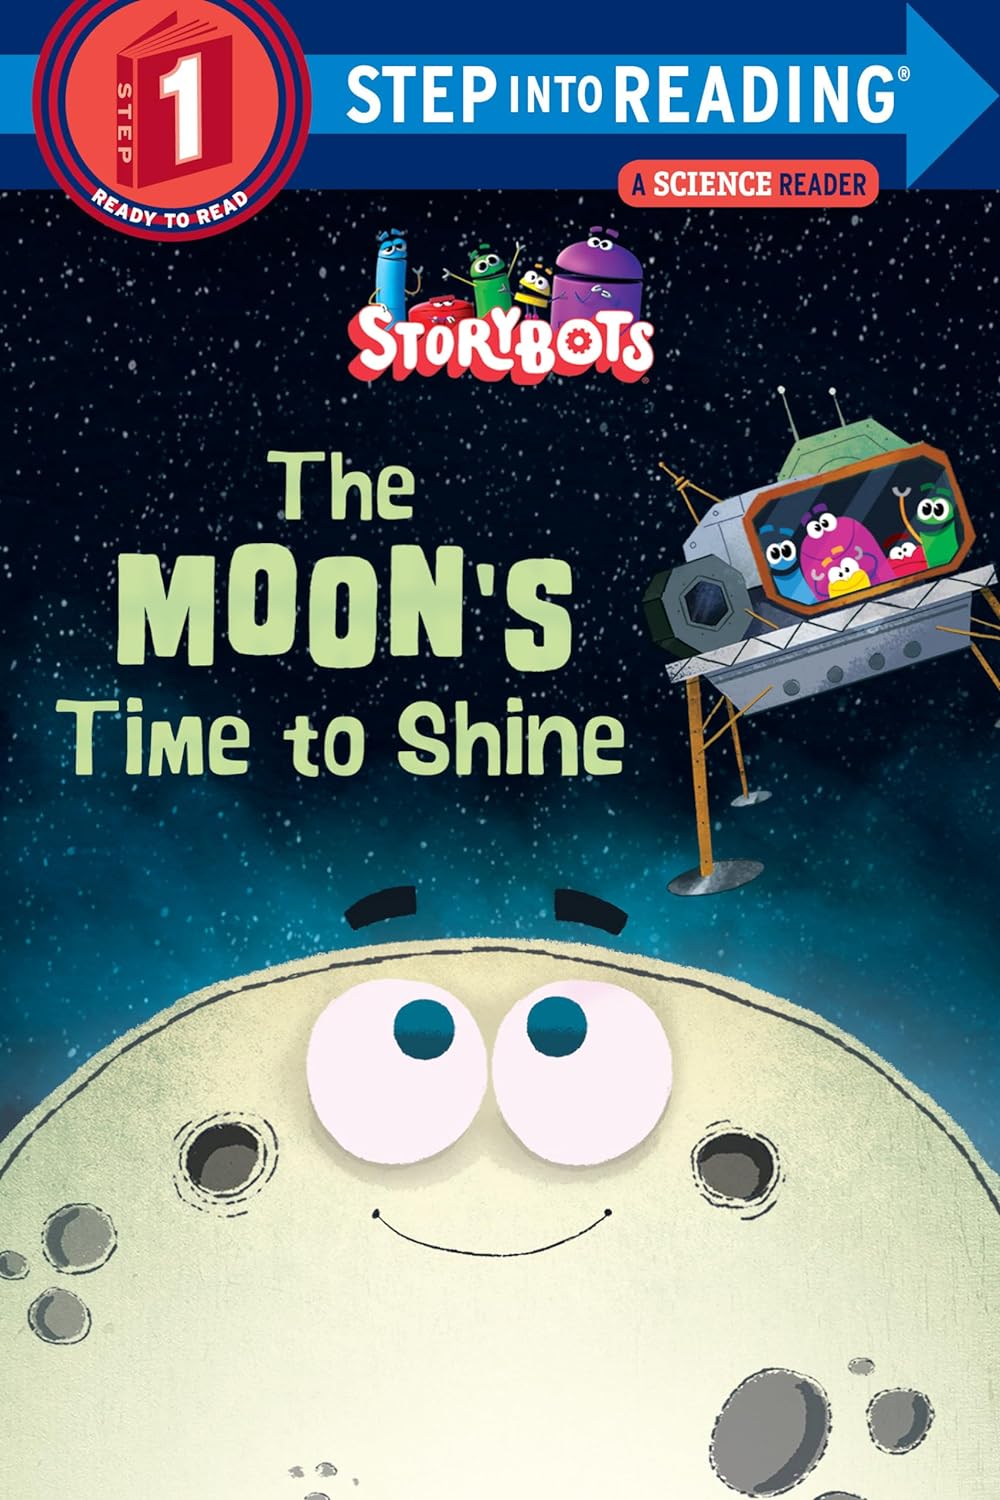 RH-SIR(Step1):The Moon's Time to Shine (Storybots)